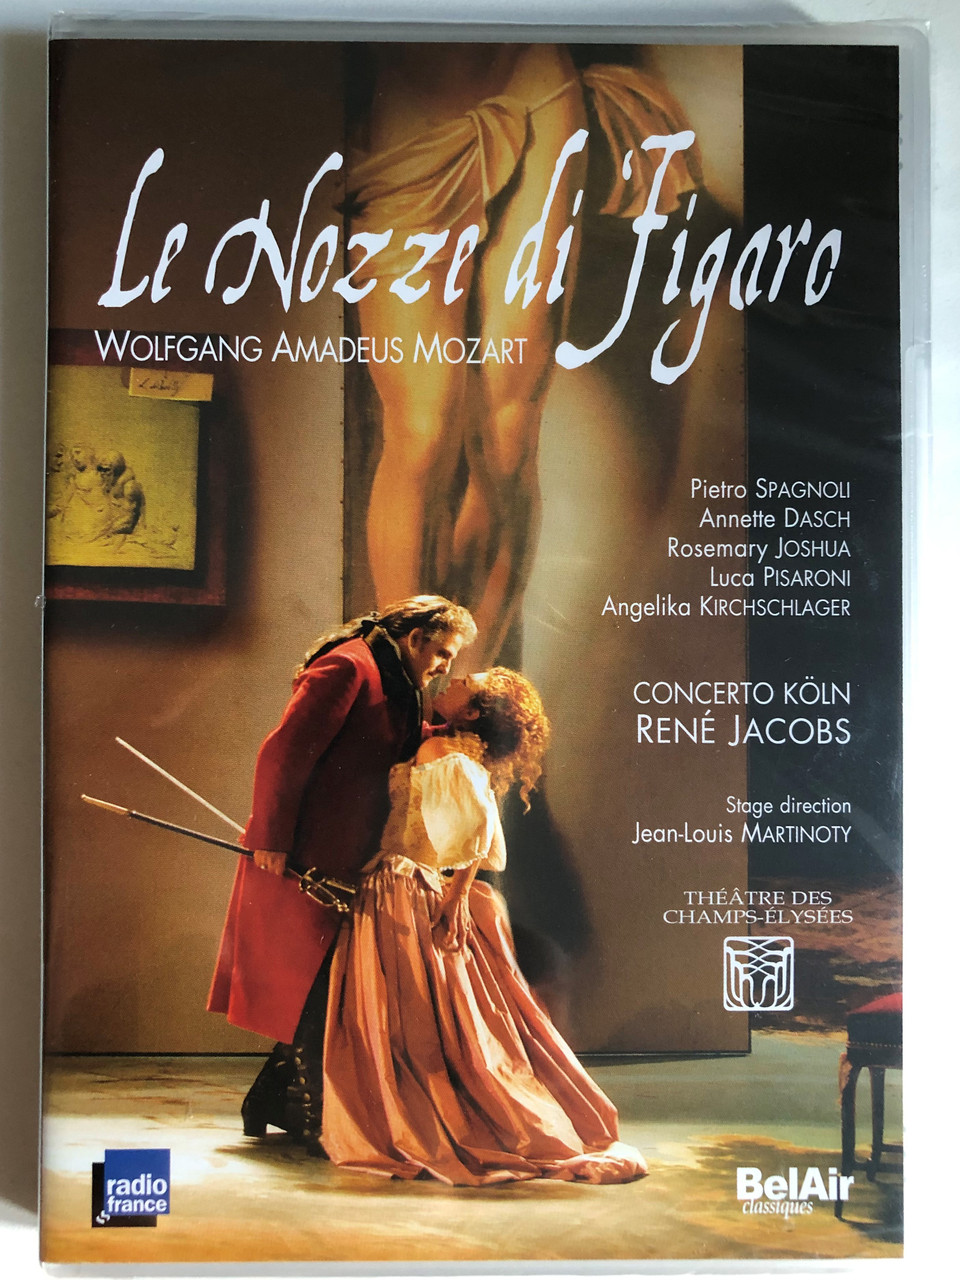 Mozart_-_Le_Nozze_di_Figaro_The_Marriage_of_Figaro_2_DVD_Set_Playful_drama_in_four_acts_Libretto_Lorenzo_Da_Ponte_Choir_of_the_Champs-lyses_Theater_HD_recording_Champs-___98369.1691646295.1280.1280.JPG (960×1280)